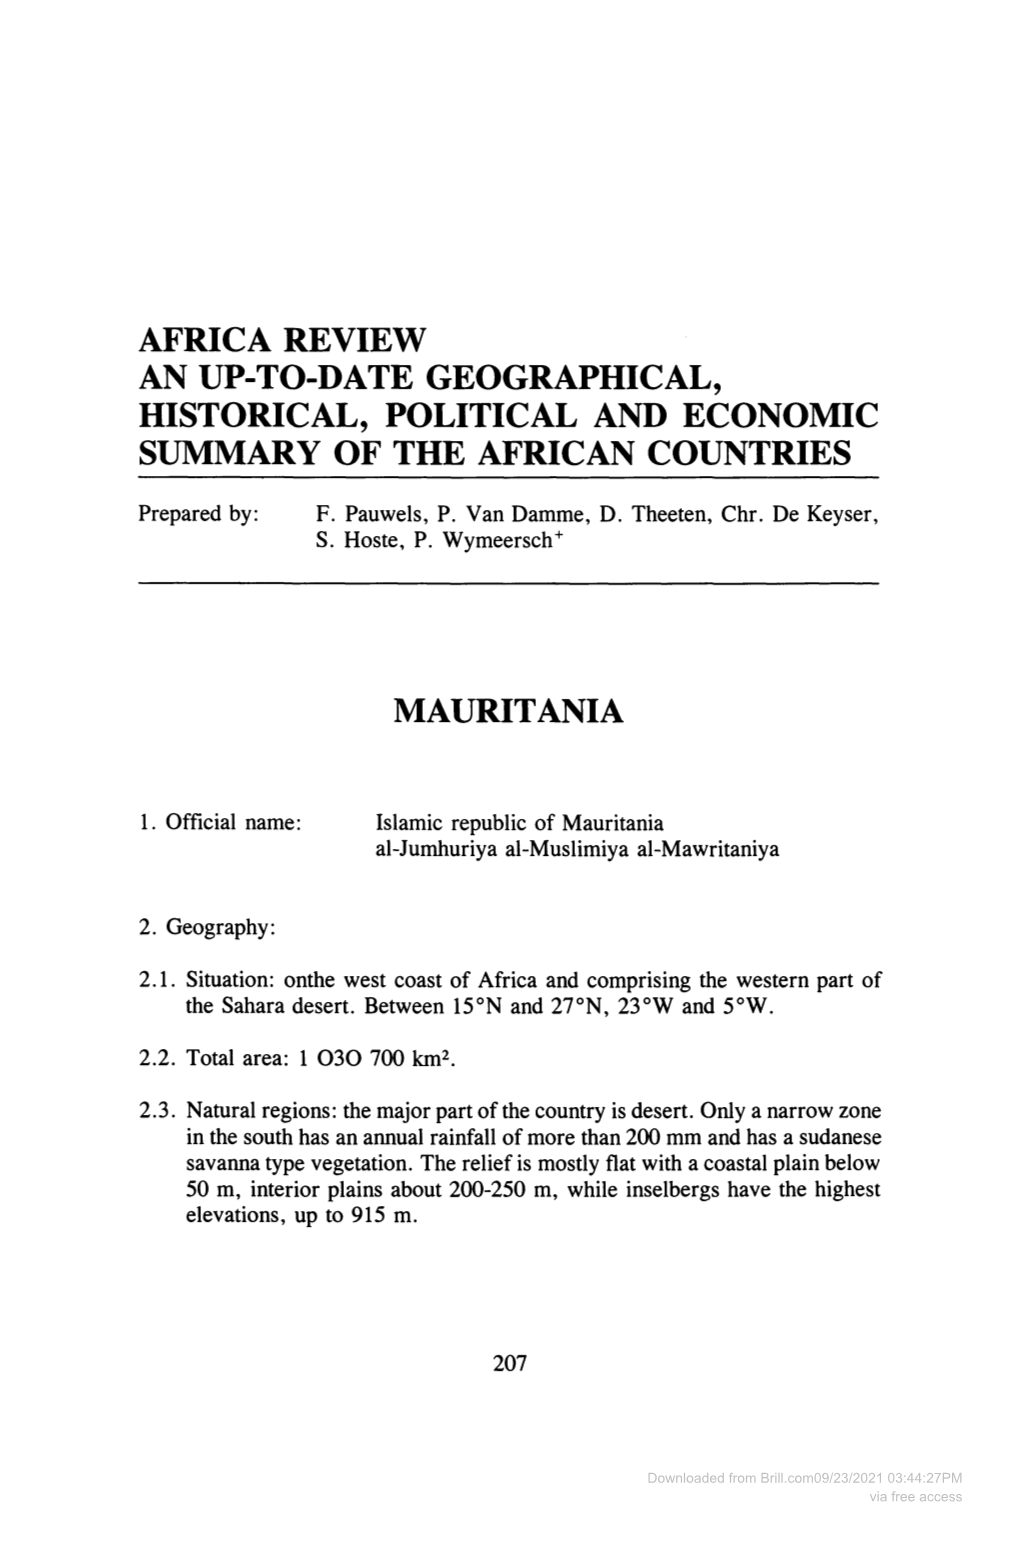 Africa Review an Up-To-Date Geographical, Historical, Political and Economic Summary of the African Countries